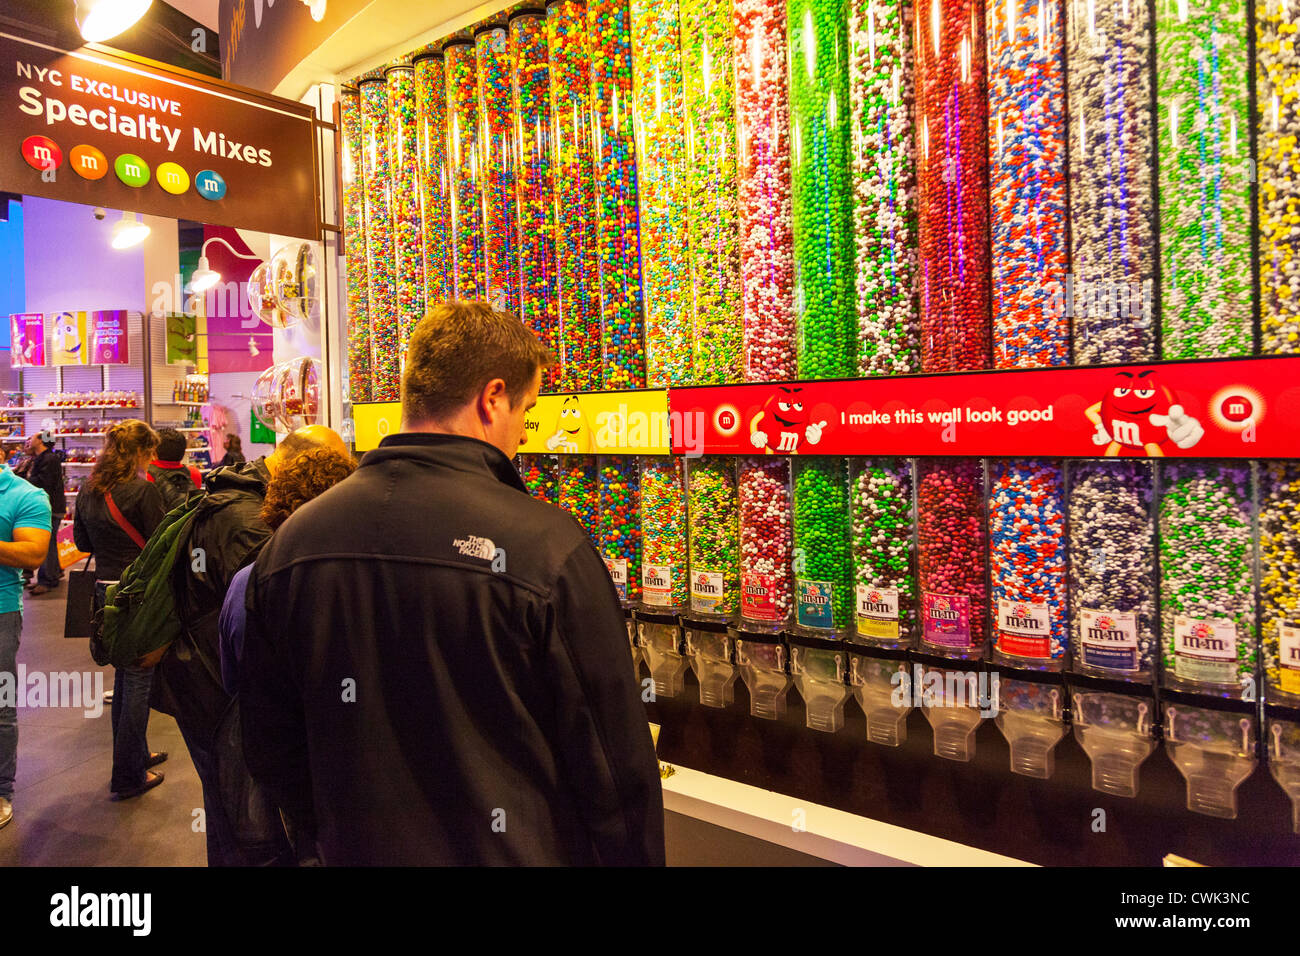 Innen M & M' Chocolate Candy Store in Manhattan New York City Times Square Stockfoto